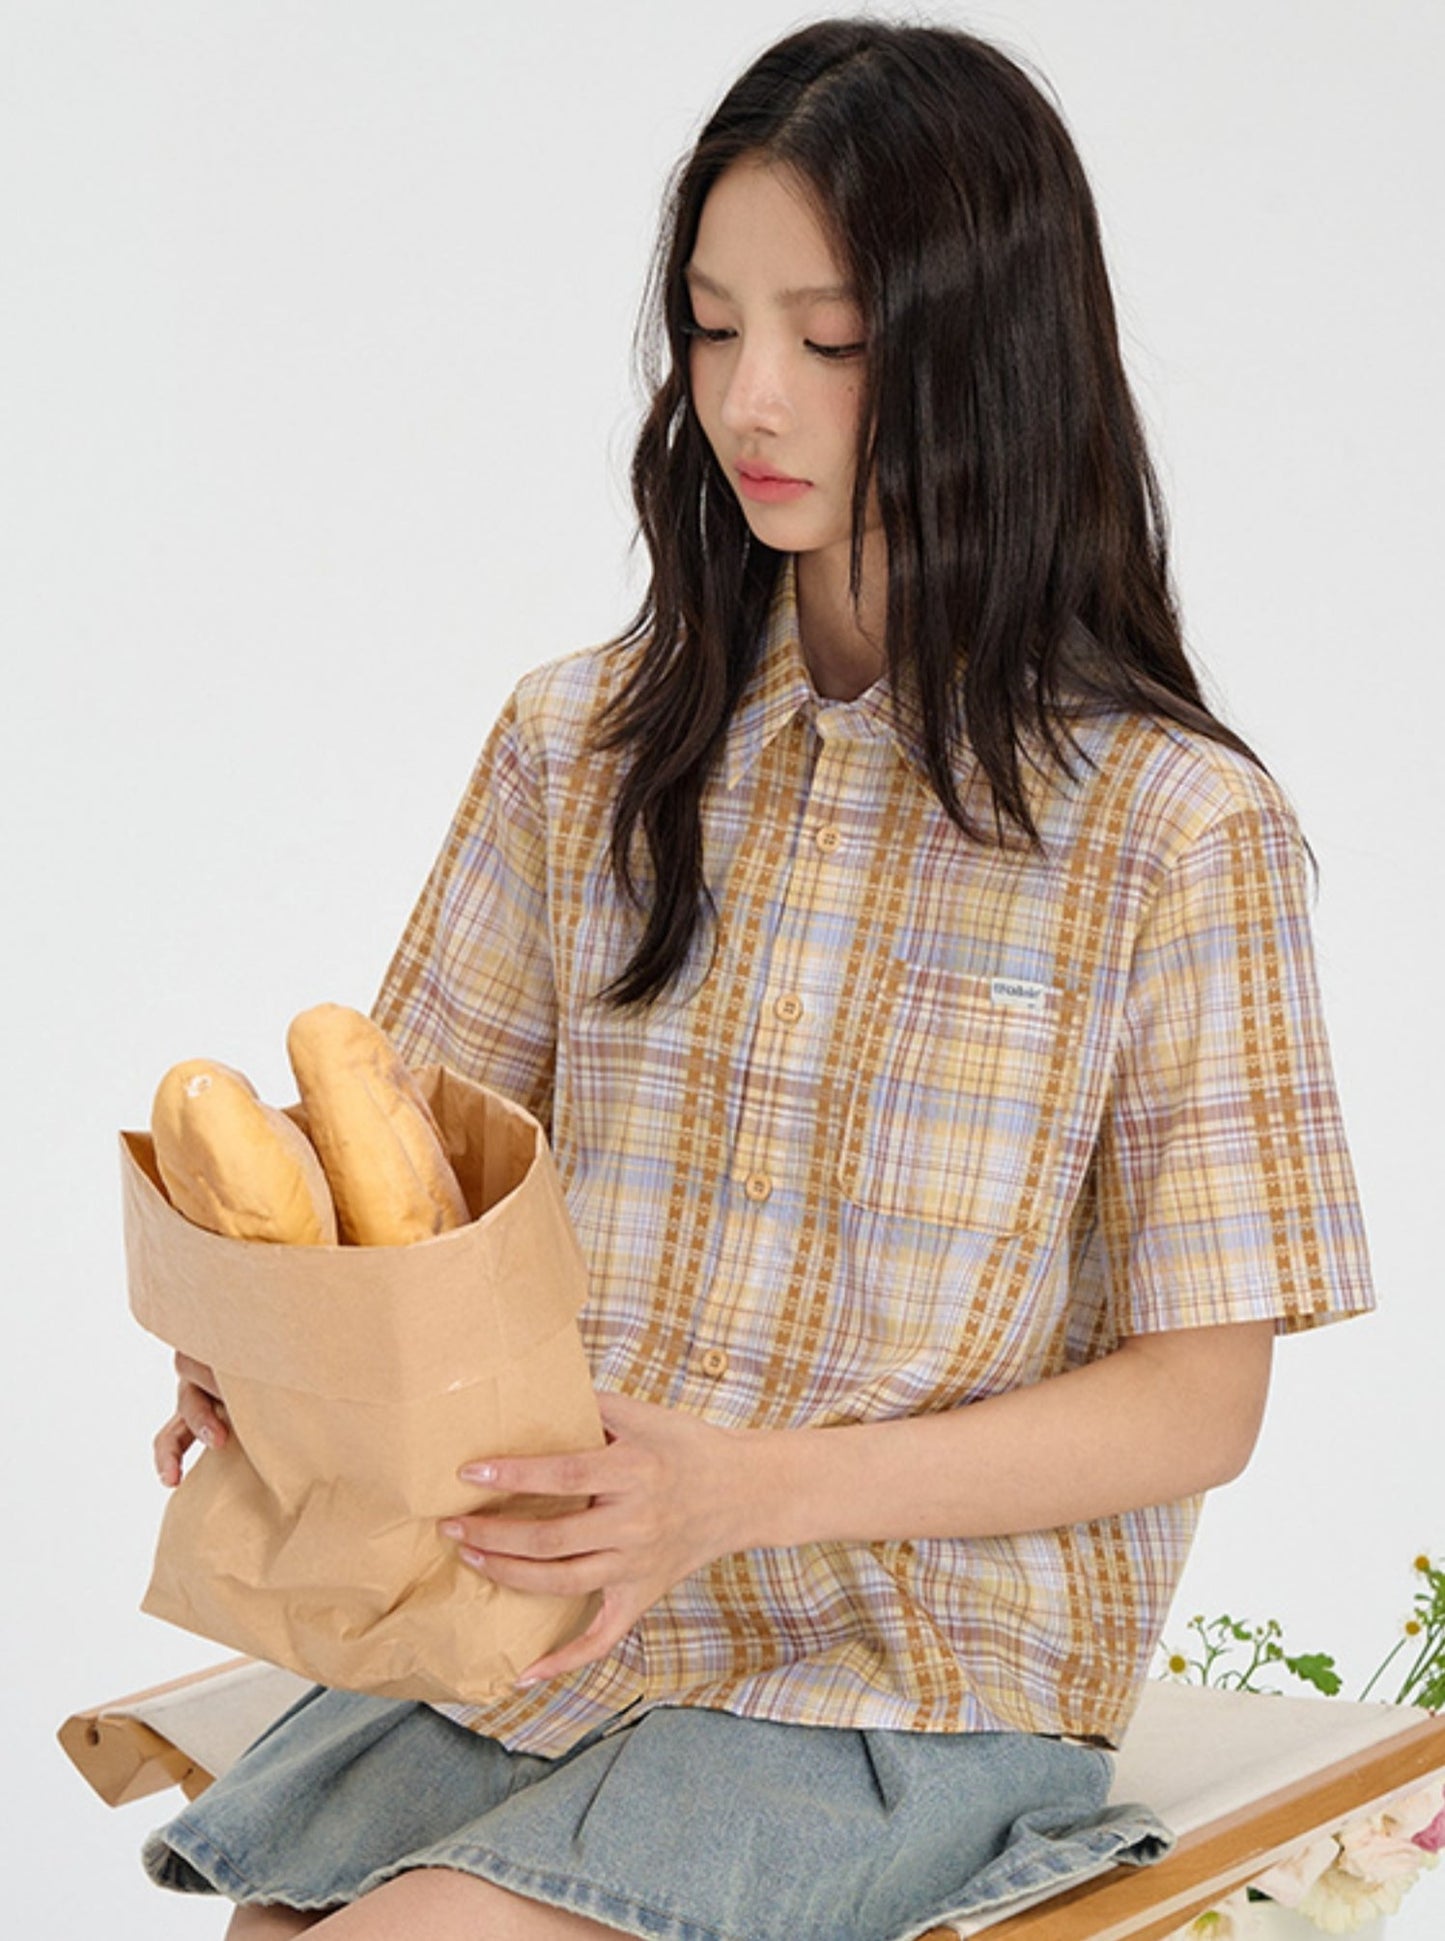 Embroidered Check Summer Shirt